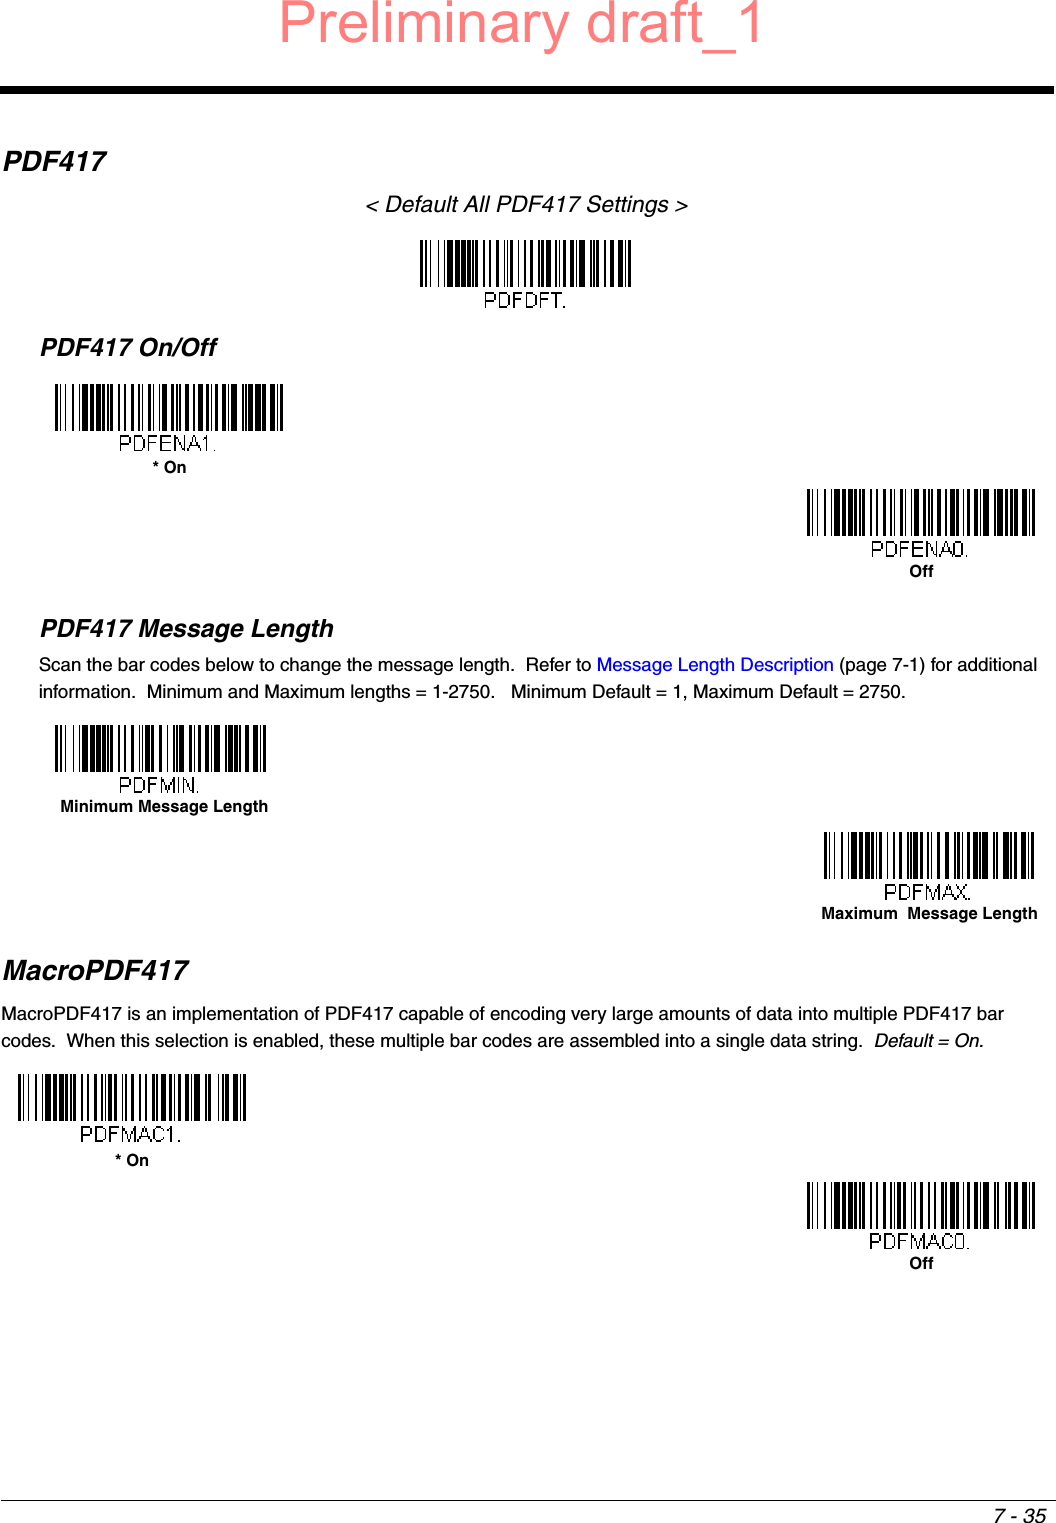 7 - 35PDF417&lt; Default All PDF417 Settings &gt;PDF417 On/OffPDF417 Message LengthScan the bar codes below to change the message length.  Refer to Message Length Description (page 7-1) for additional information.  Minimum and Maximum lengths = 1-2750.   Minimum Default = 1, Maximum Default = 2750.MacroPDF417MacroPDF417 is an implementation of PDF417 capable of encoding very large amounts of data into multiple PDF417 bar codes.  When this selection is enabled, these multiple bar codes are assembled into a single data string.  Default = On. * OnOff Minimum Message LengthMaximum  Message Length* OnOffPreliminary draft_1